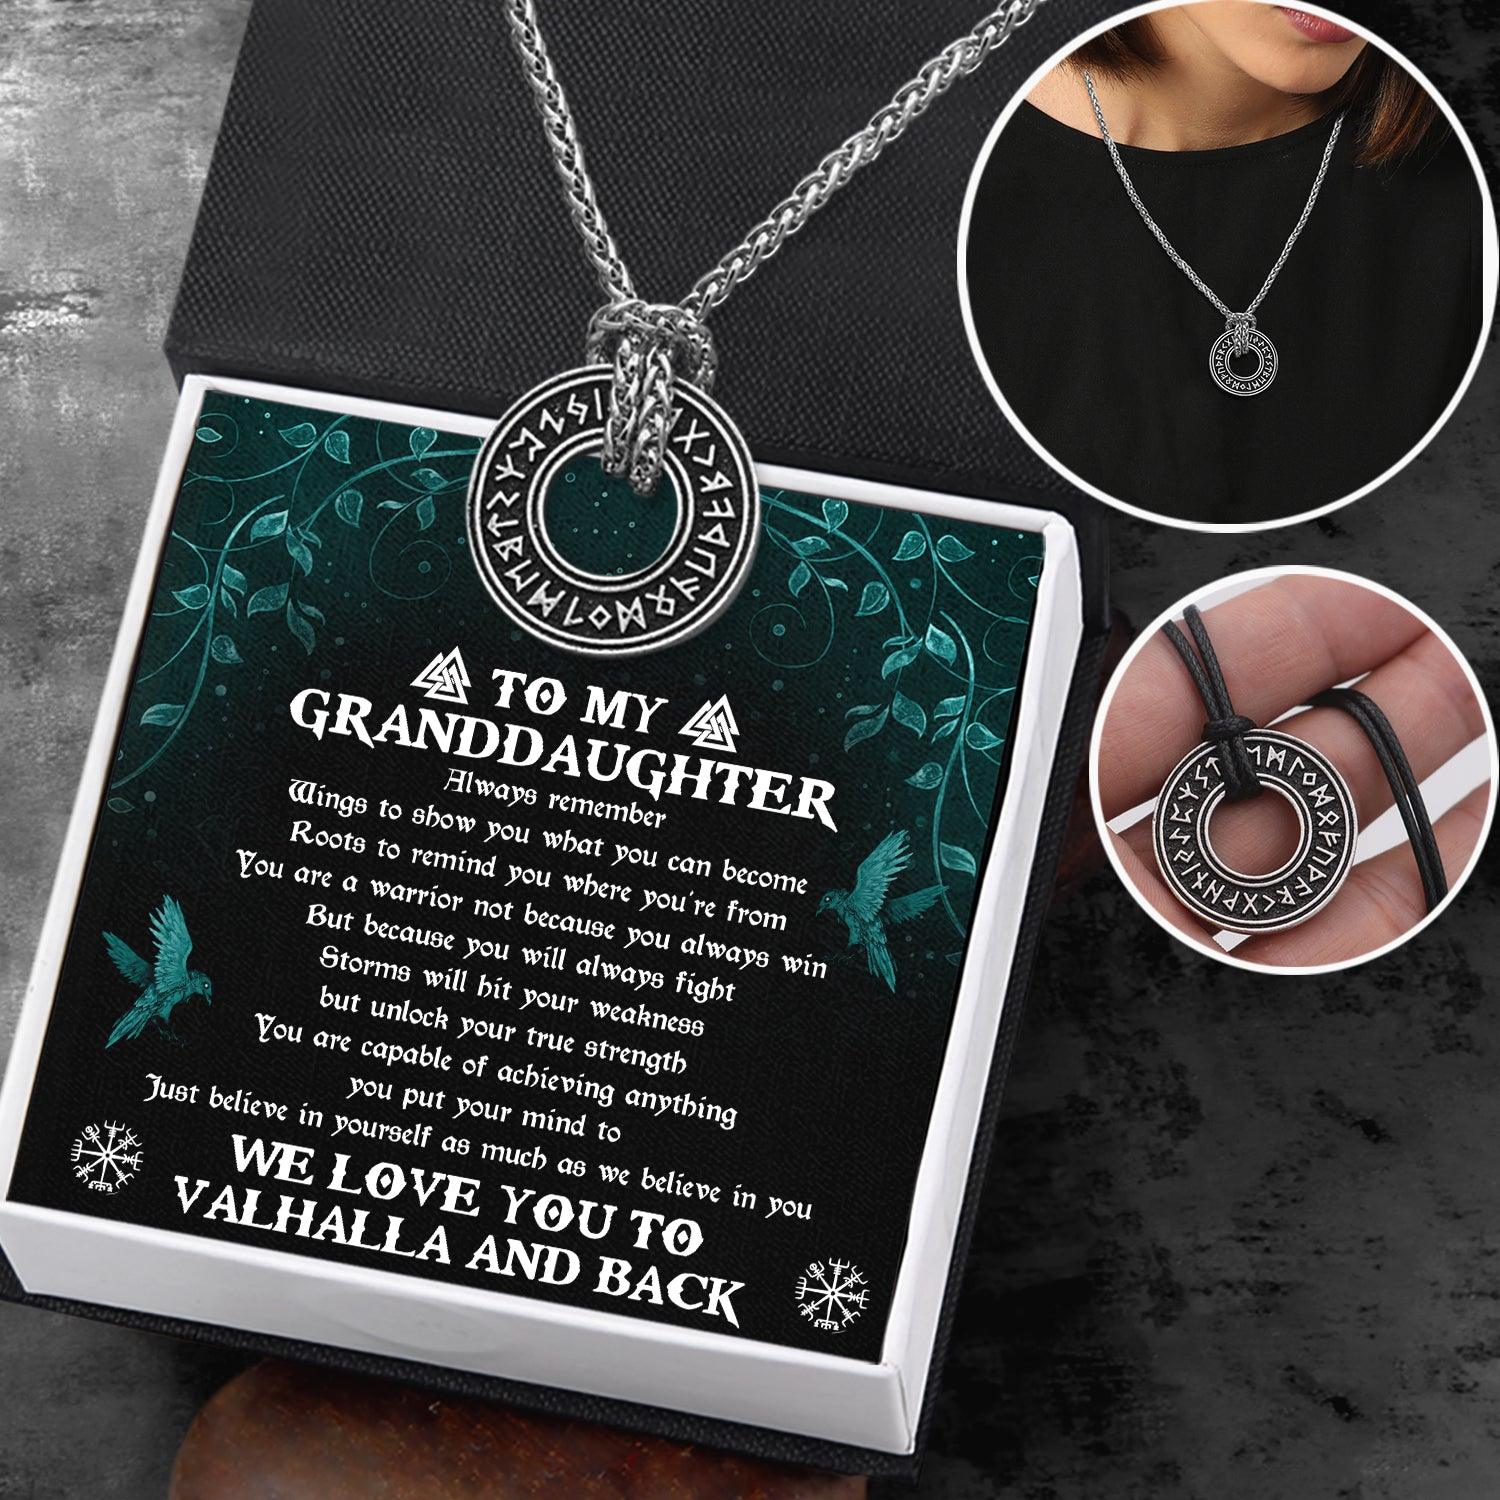 Viking Rune Necklace - Viking - To My Granddaughter - I Love You To Valhalla And Back - Augndy23001 - Gifts Holder